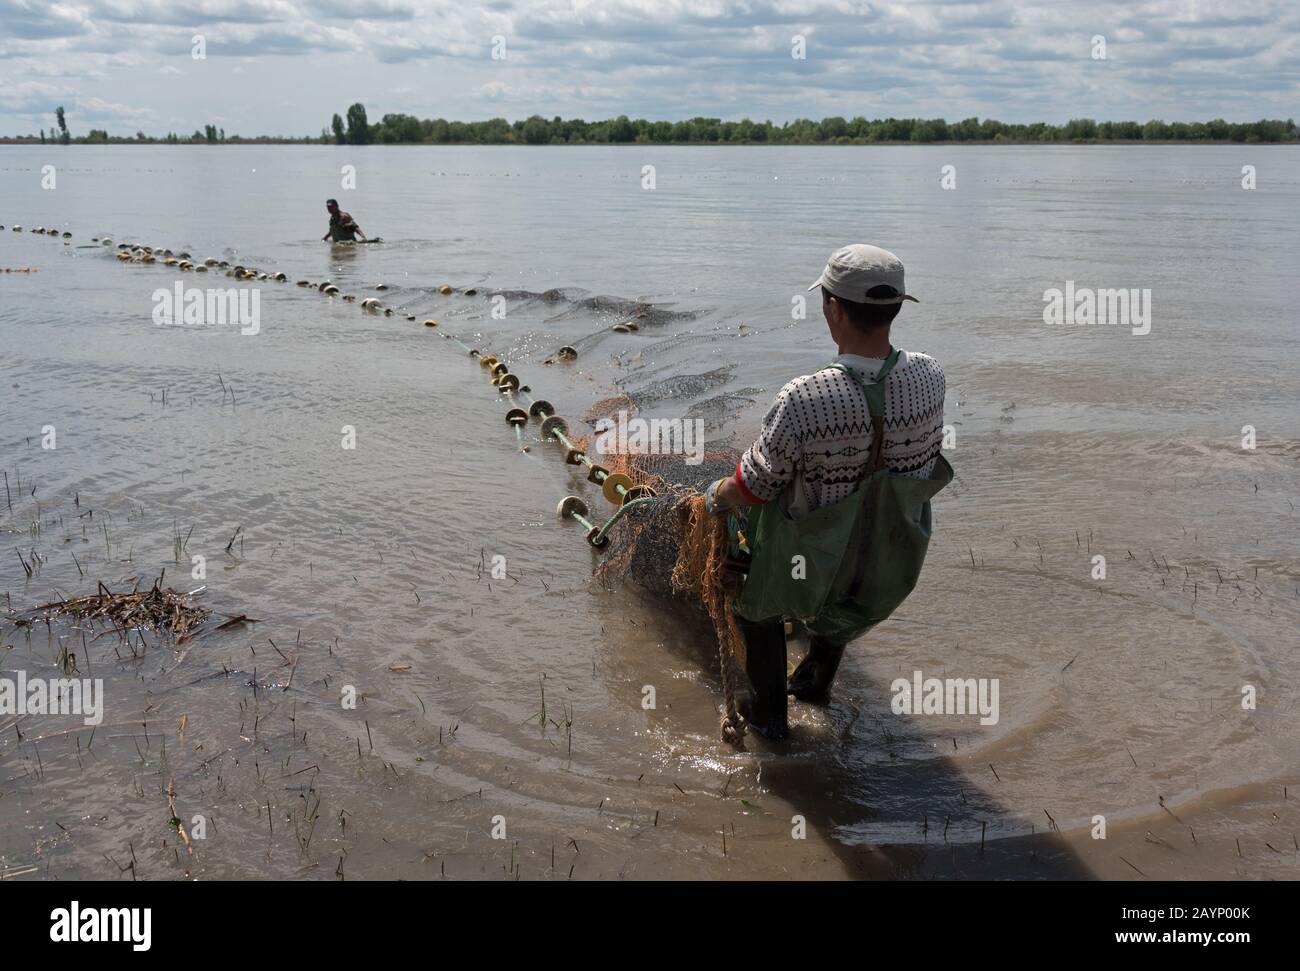 Fishermеn drag and trawls the fishing net with fish in the river